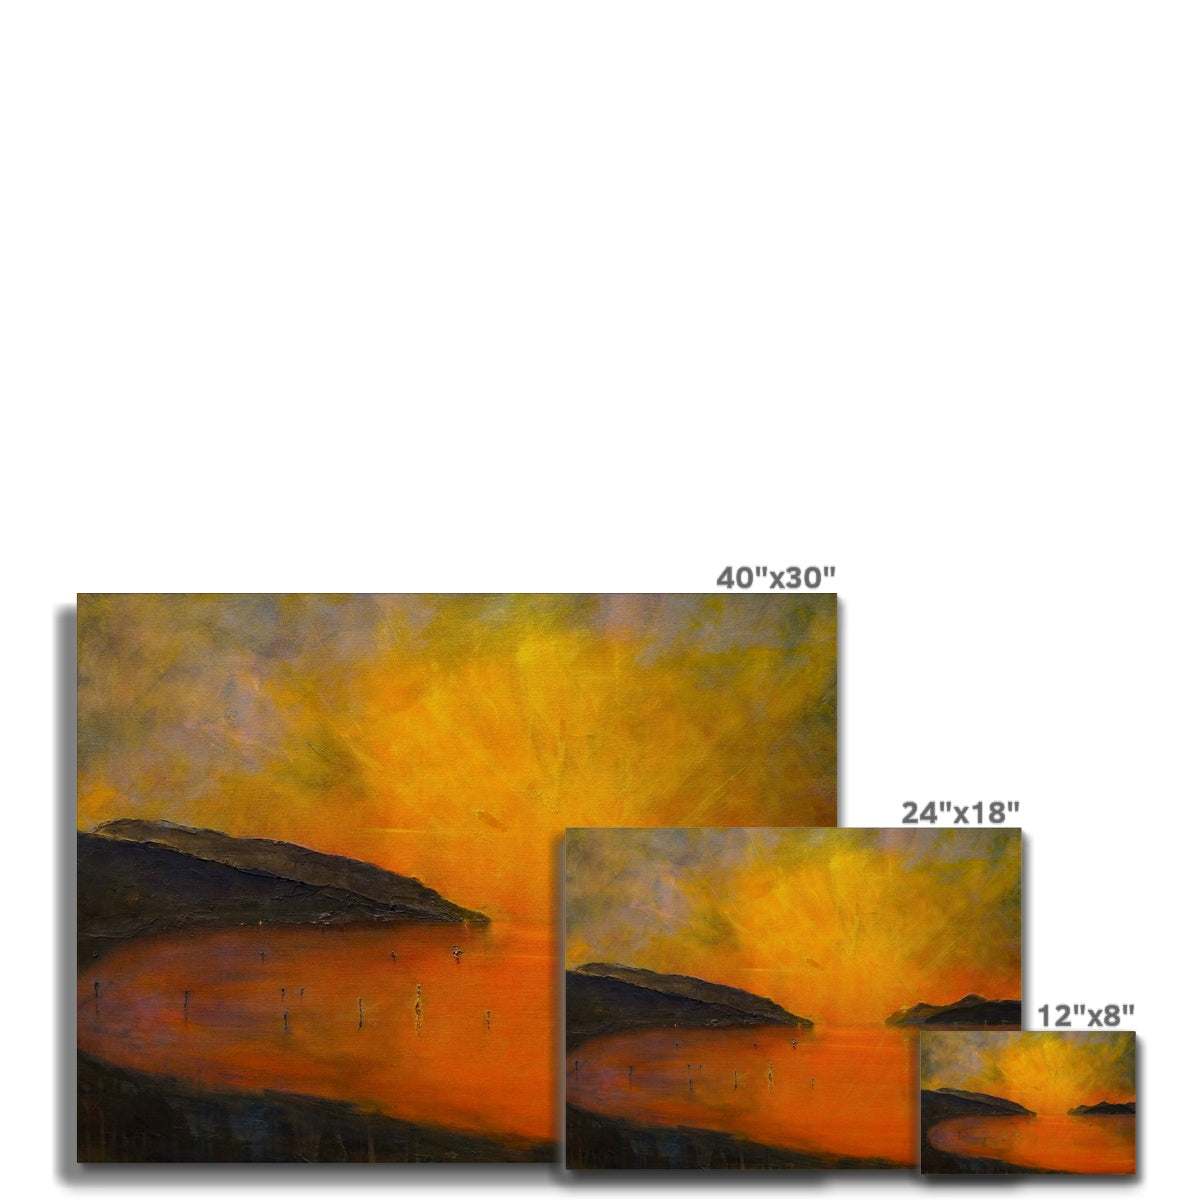 Loch Ness Sunset Painting | Canvas From Scotland-Contemporary Stretched Canvas Prints-Scottish Lochs & Mountains Art Gallery-Paintings, Prints, Homeware, Art Gifts From Scotland By Scottish Artist Kevin Hunter